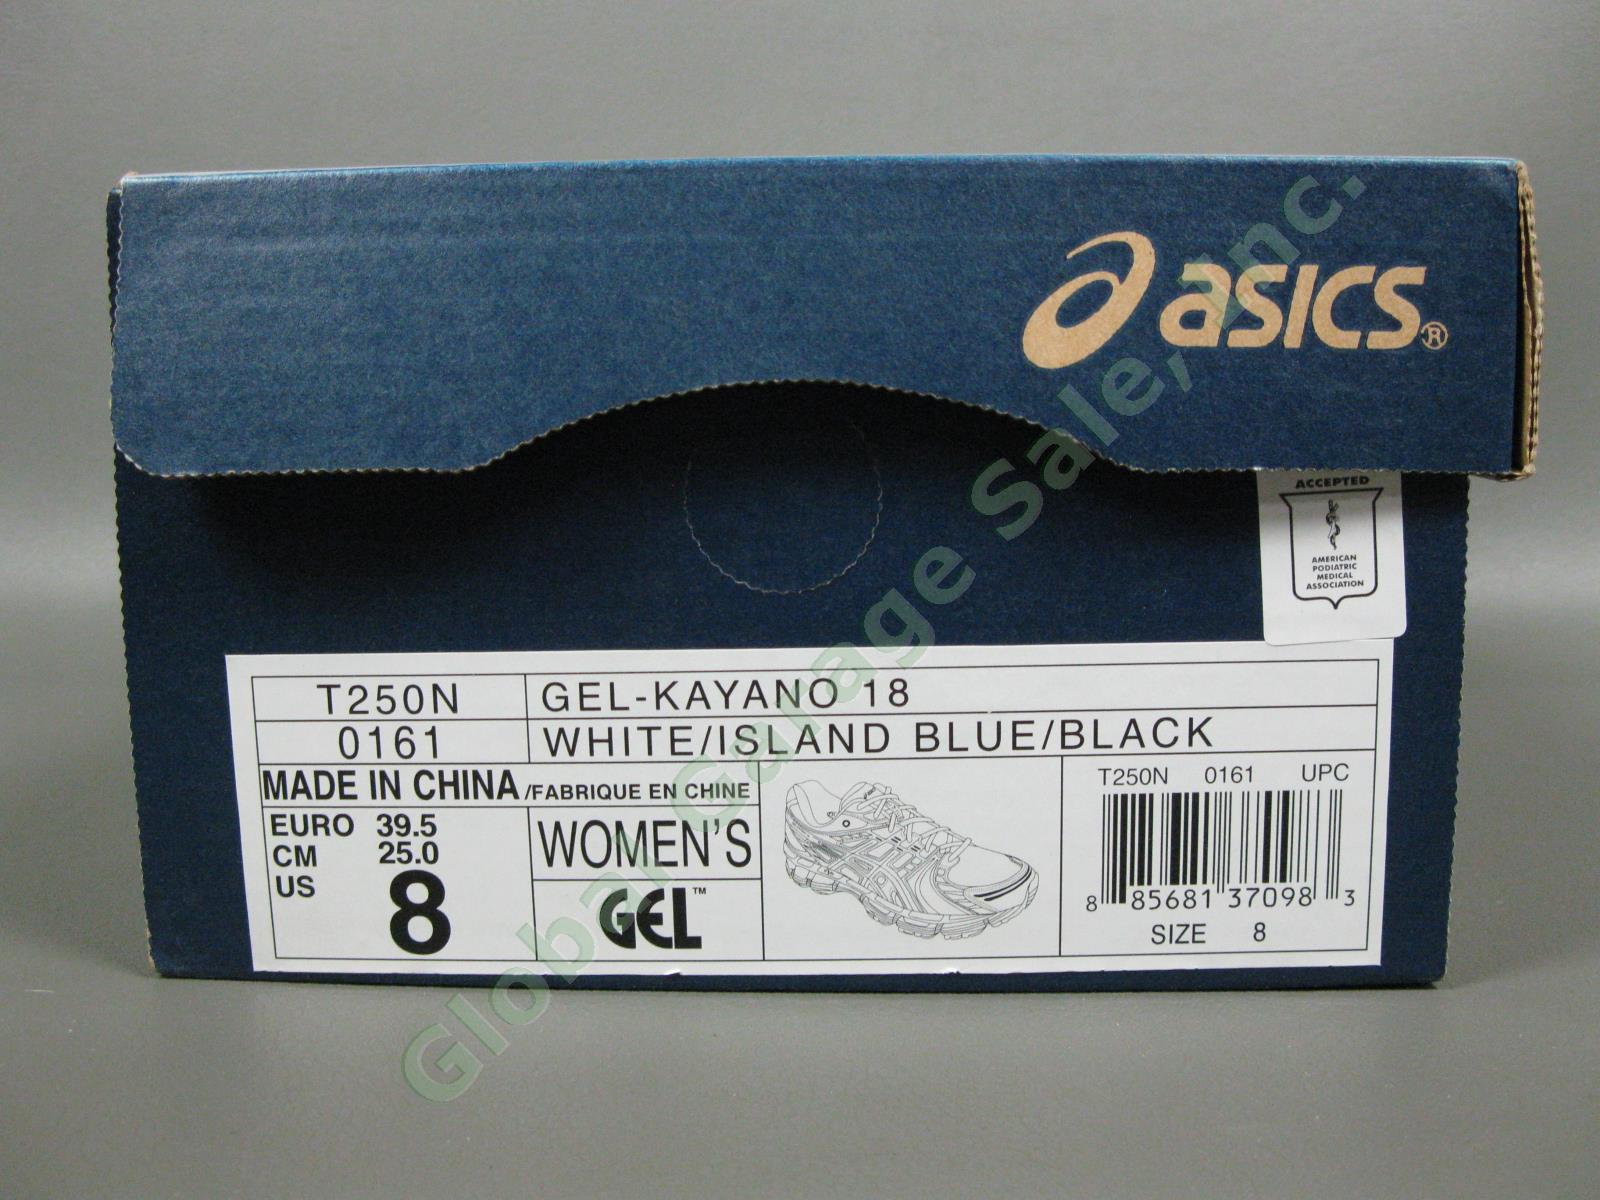 NEW Asics Gel Kayano-18 Womens White/Blue Running Sneakers Pair Size US-8 Shoes 8